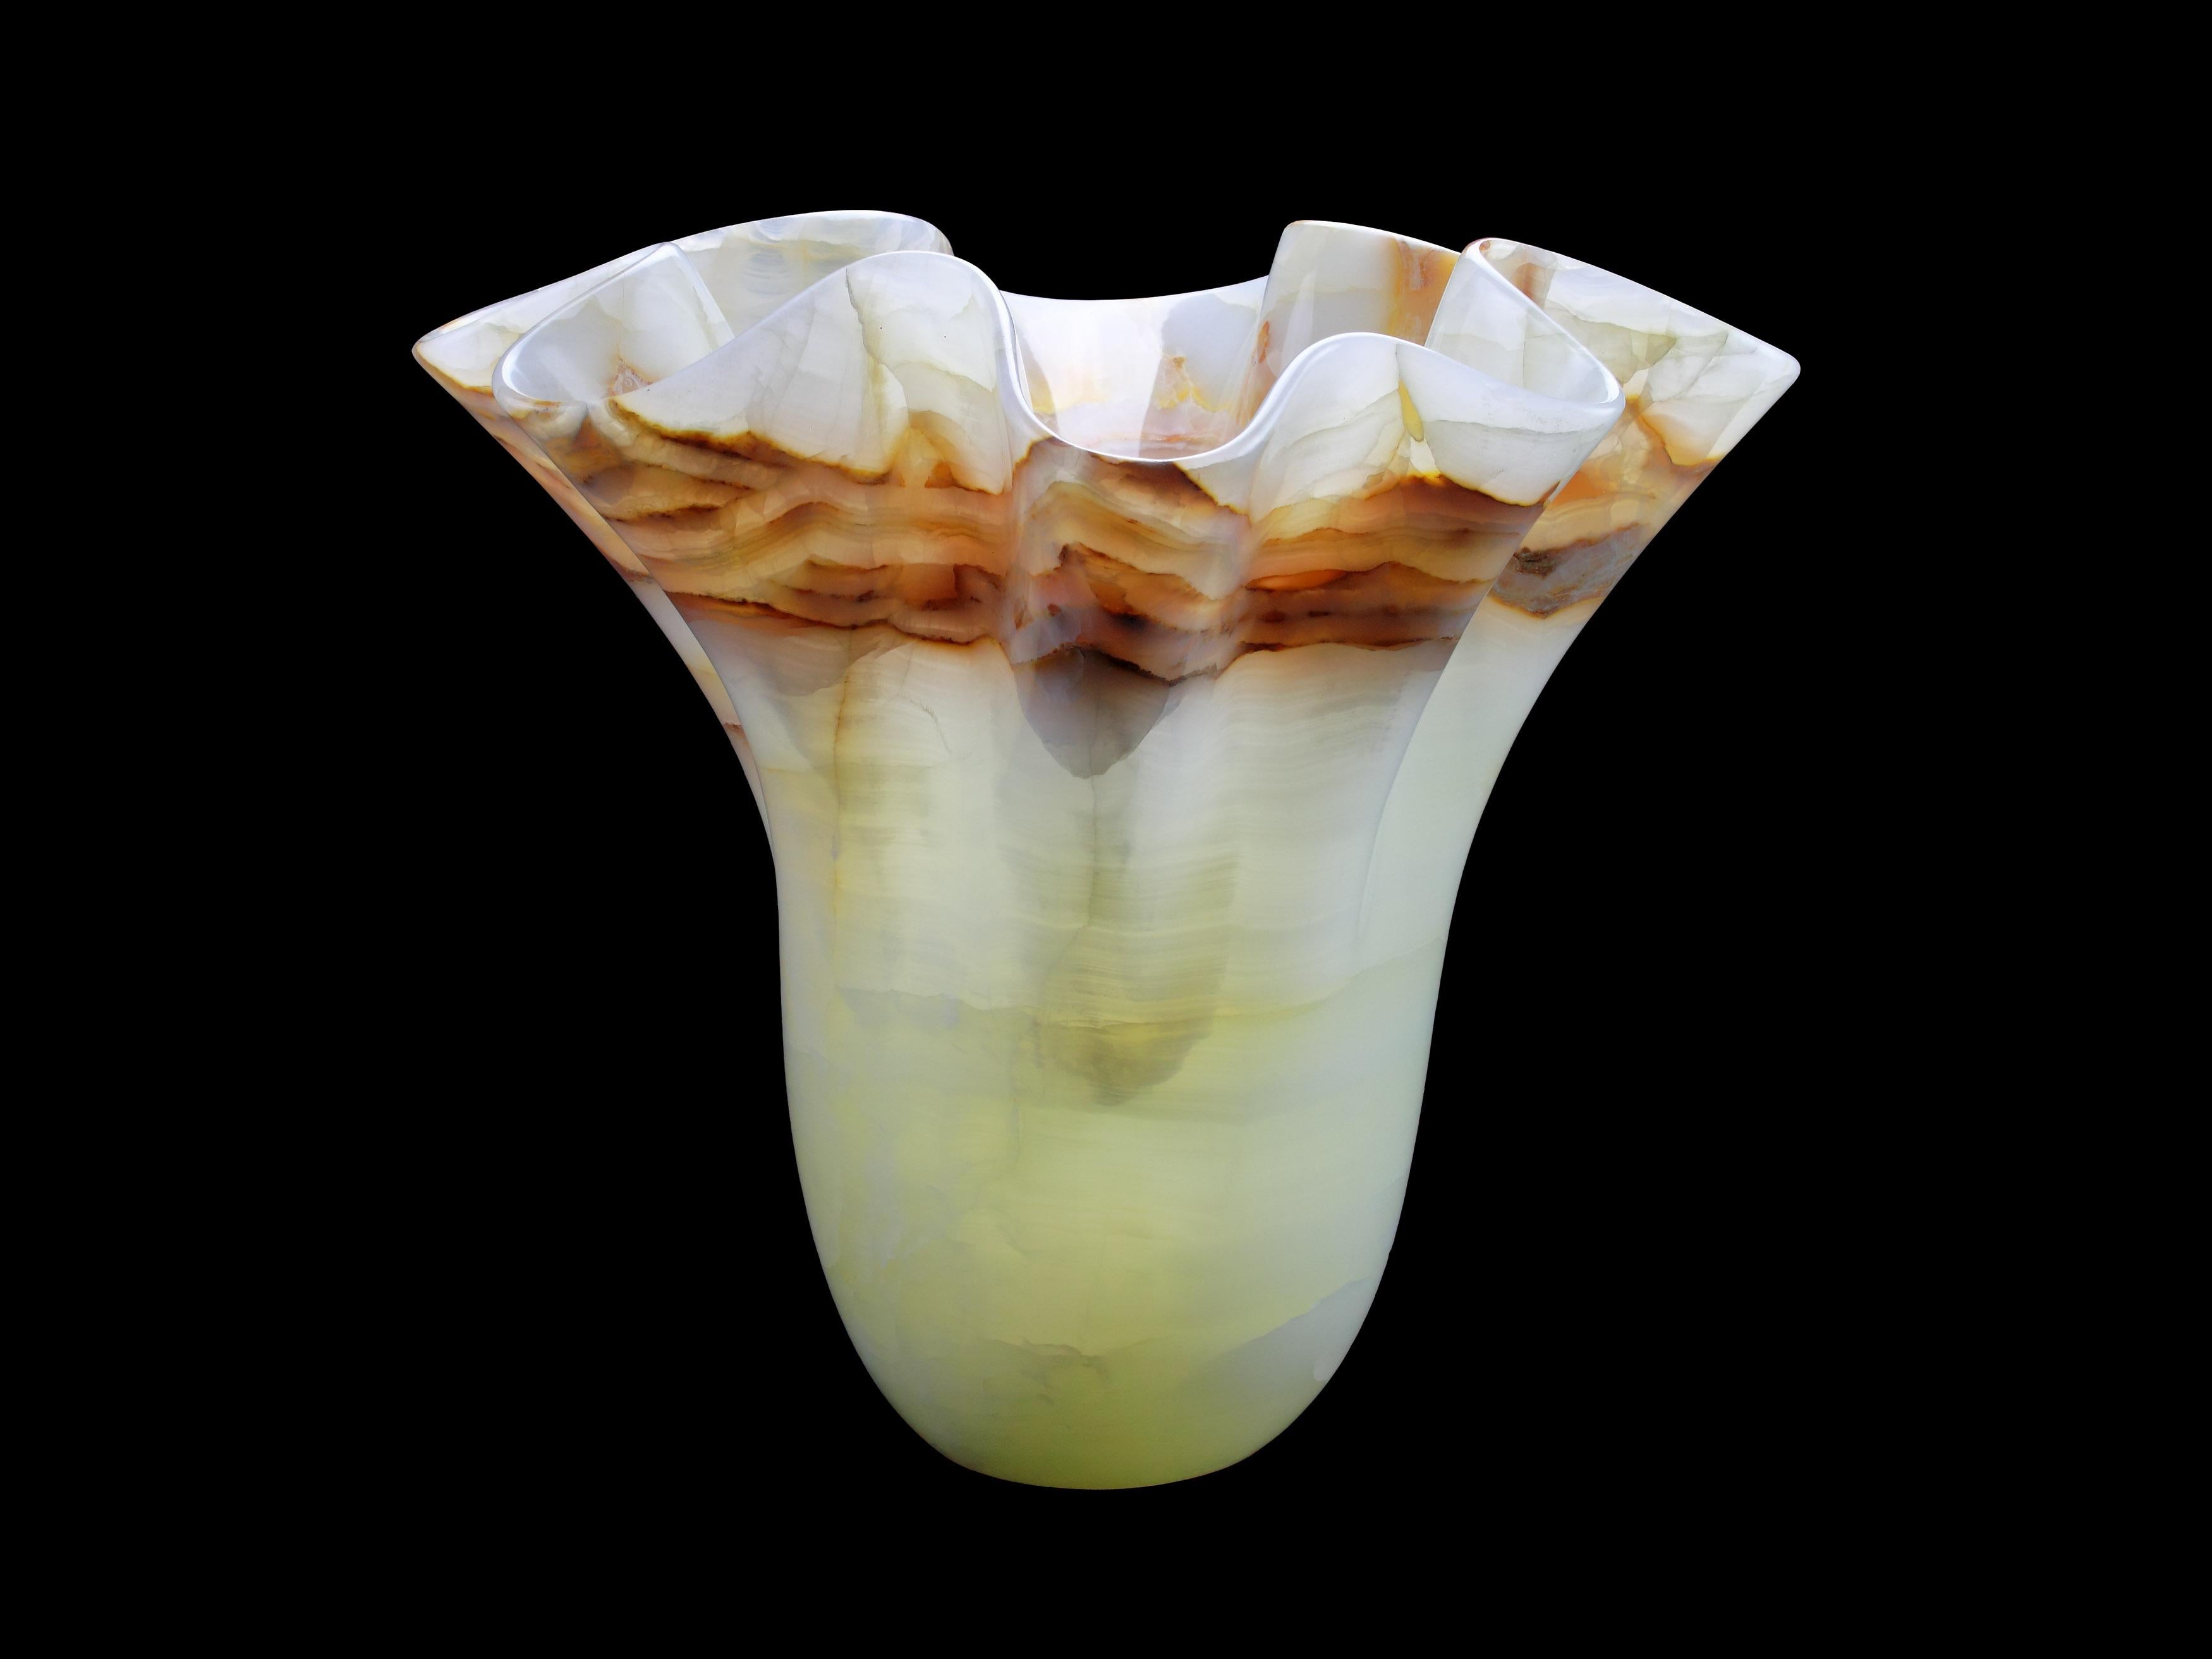 Vase Vessel Sculpture Organic Shape White Onyx Marble Collectible Design Italy For Sale 3